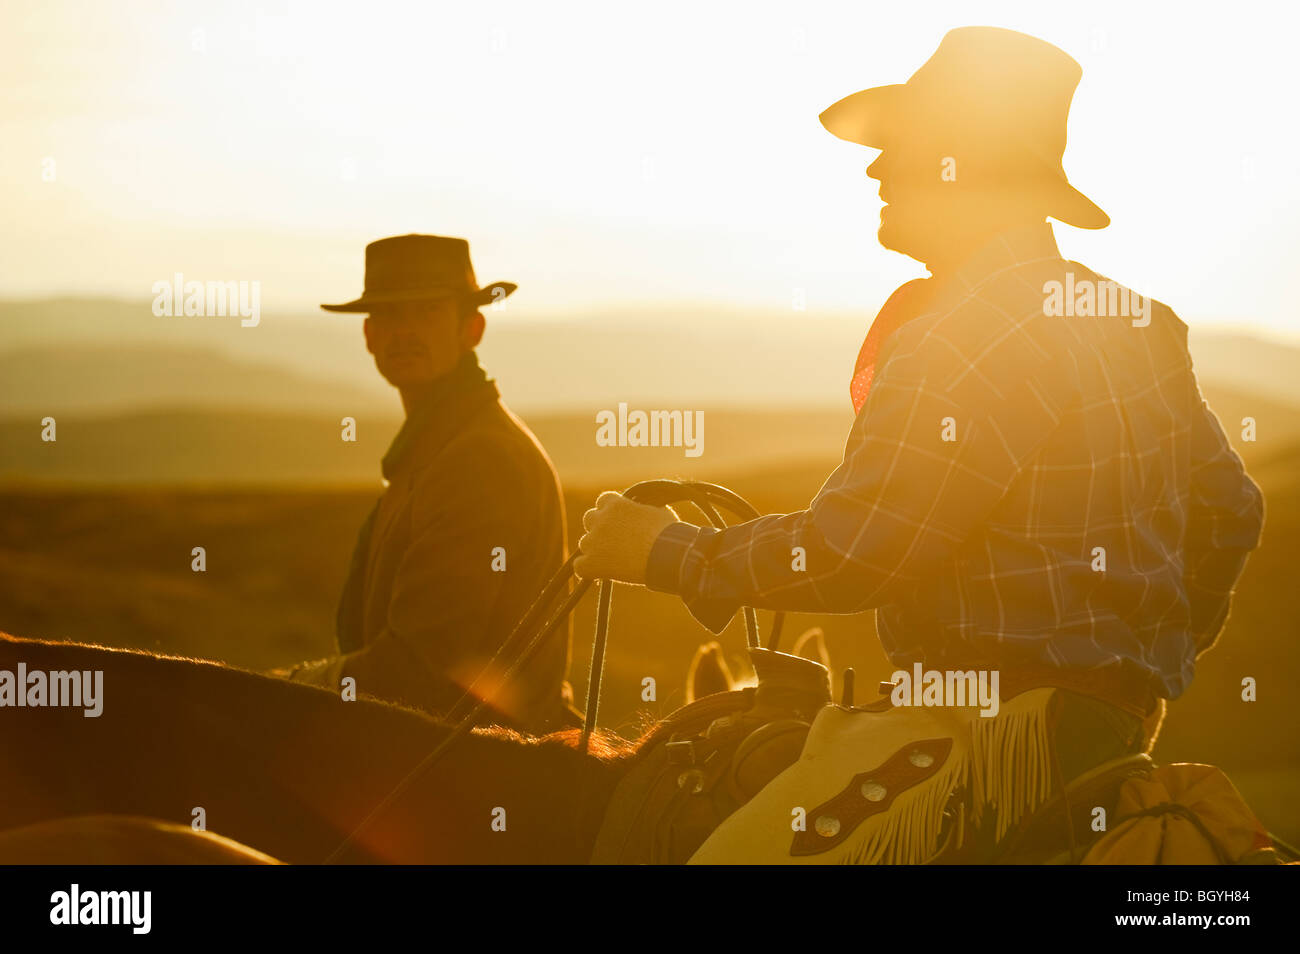 Page 5 - Us Stock Photos & Images from Alamy